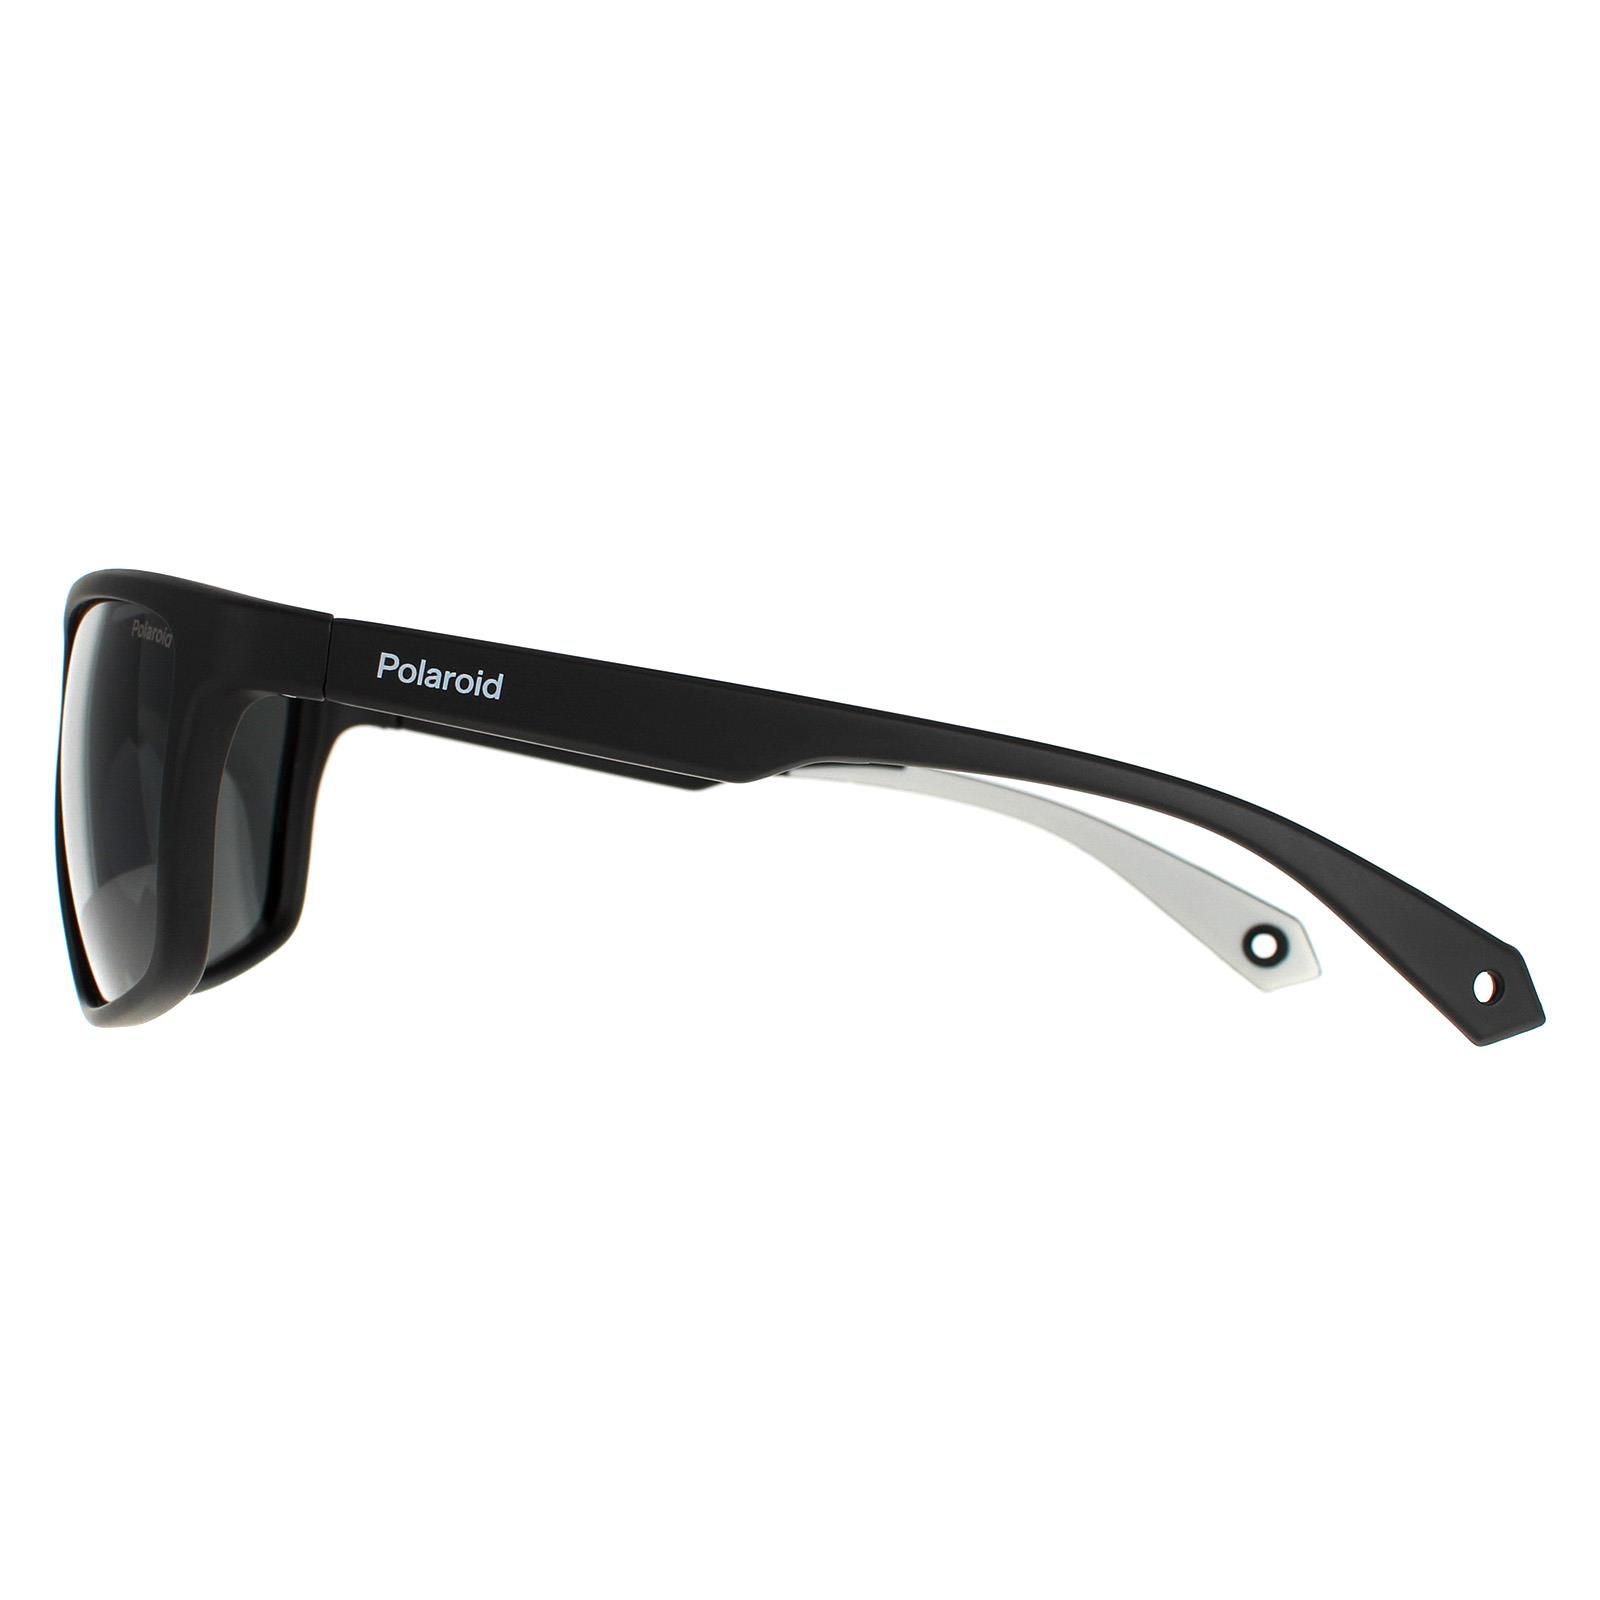 Polaroid Wrap Mens Black Grey Grey Polarized PLD 7040/S  Polaroid are a sporty wrap around style made from lightweight plastic with Polaroid branding on the temples and a strap removable strap to hold the sunglasses in place.